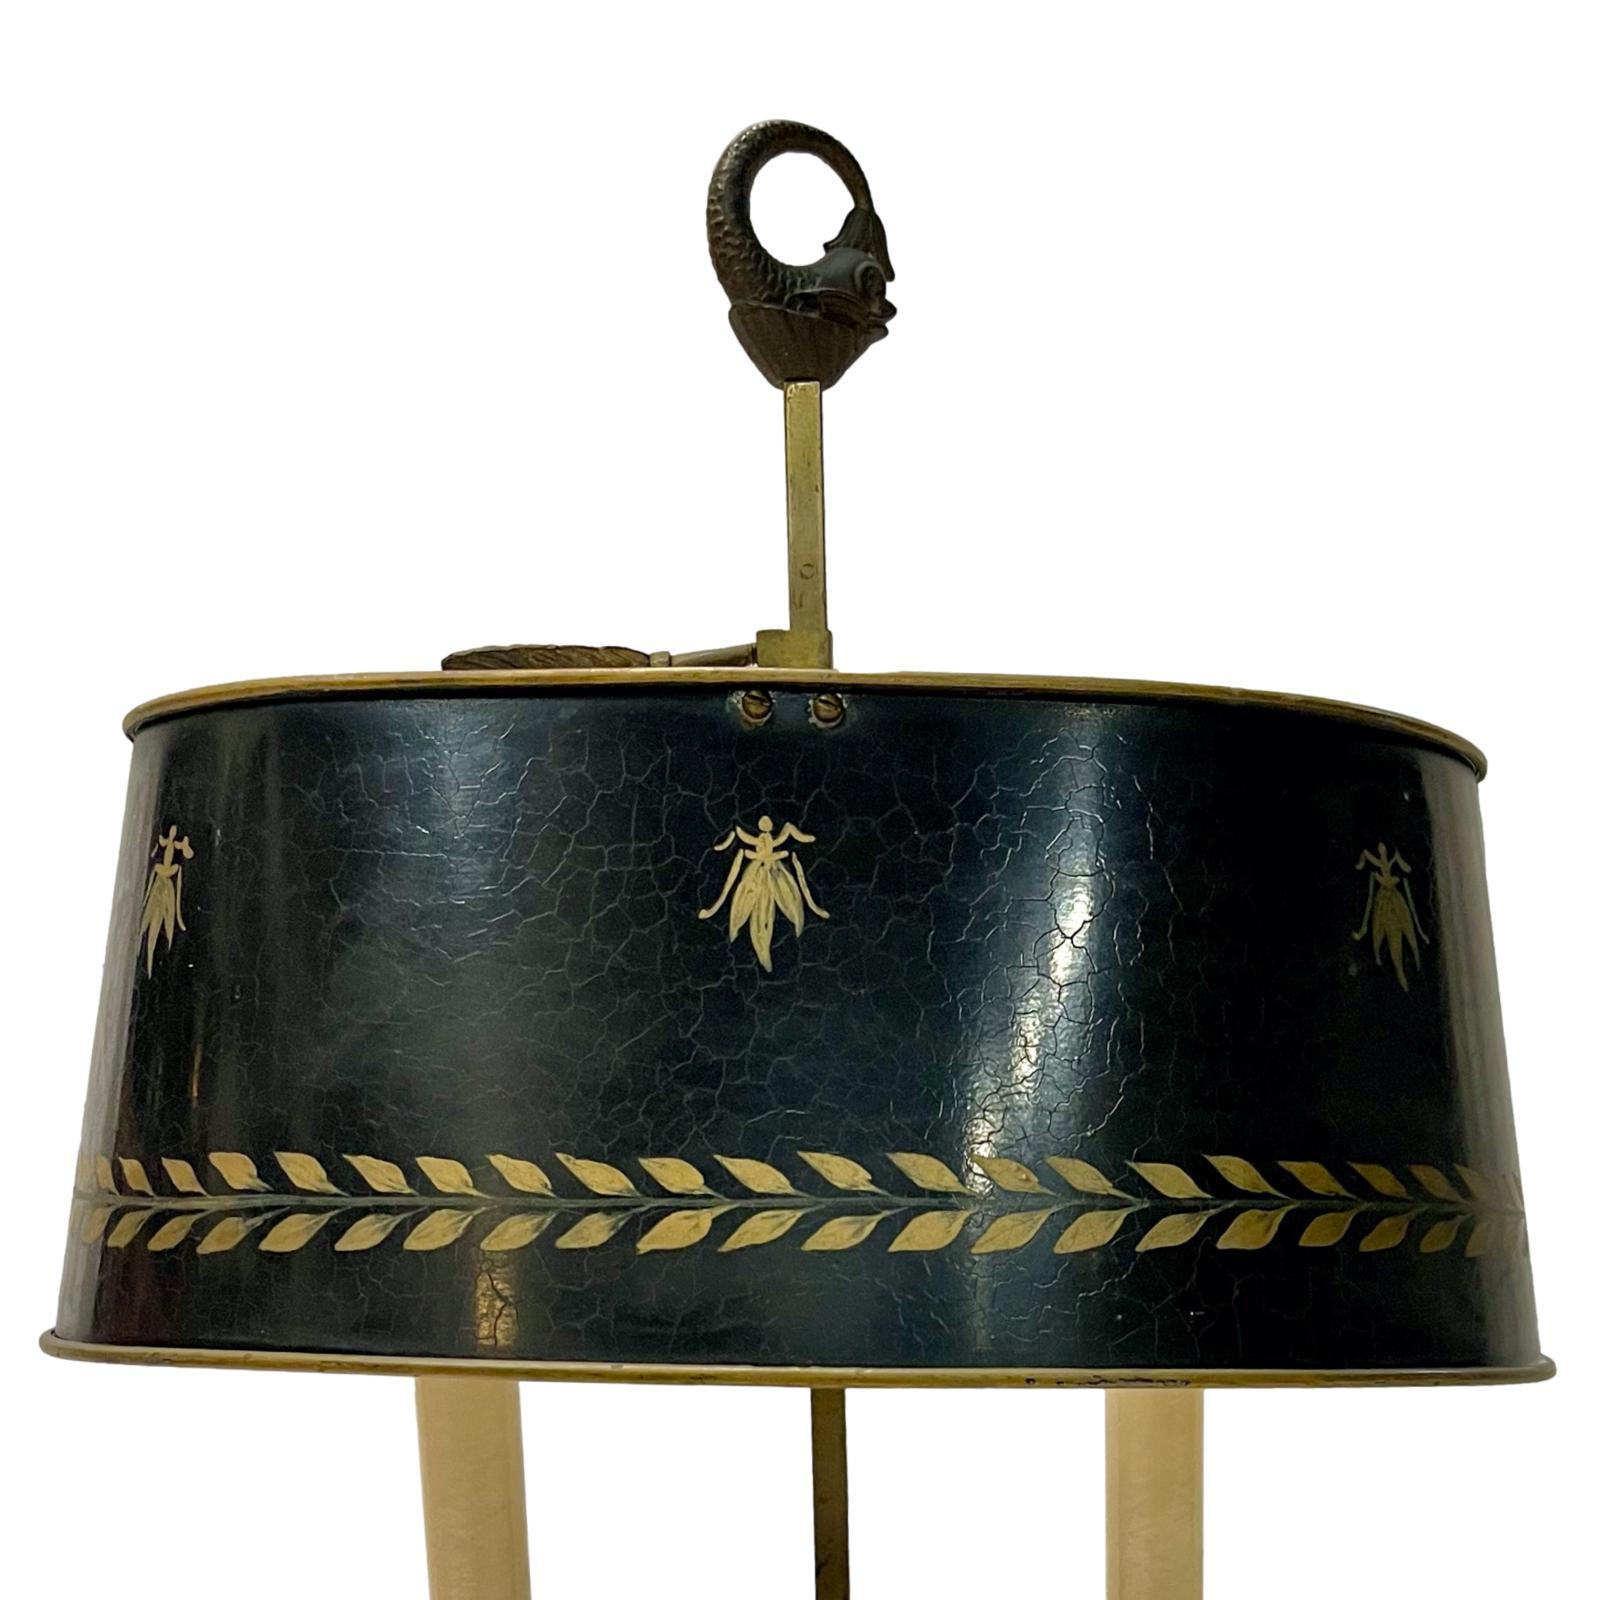 A circa 1950's French bronze desk lamp with dolphins on body.

Measurements:
Height: 20.5